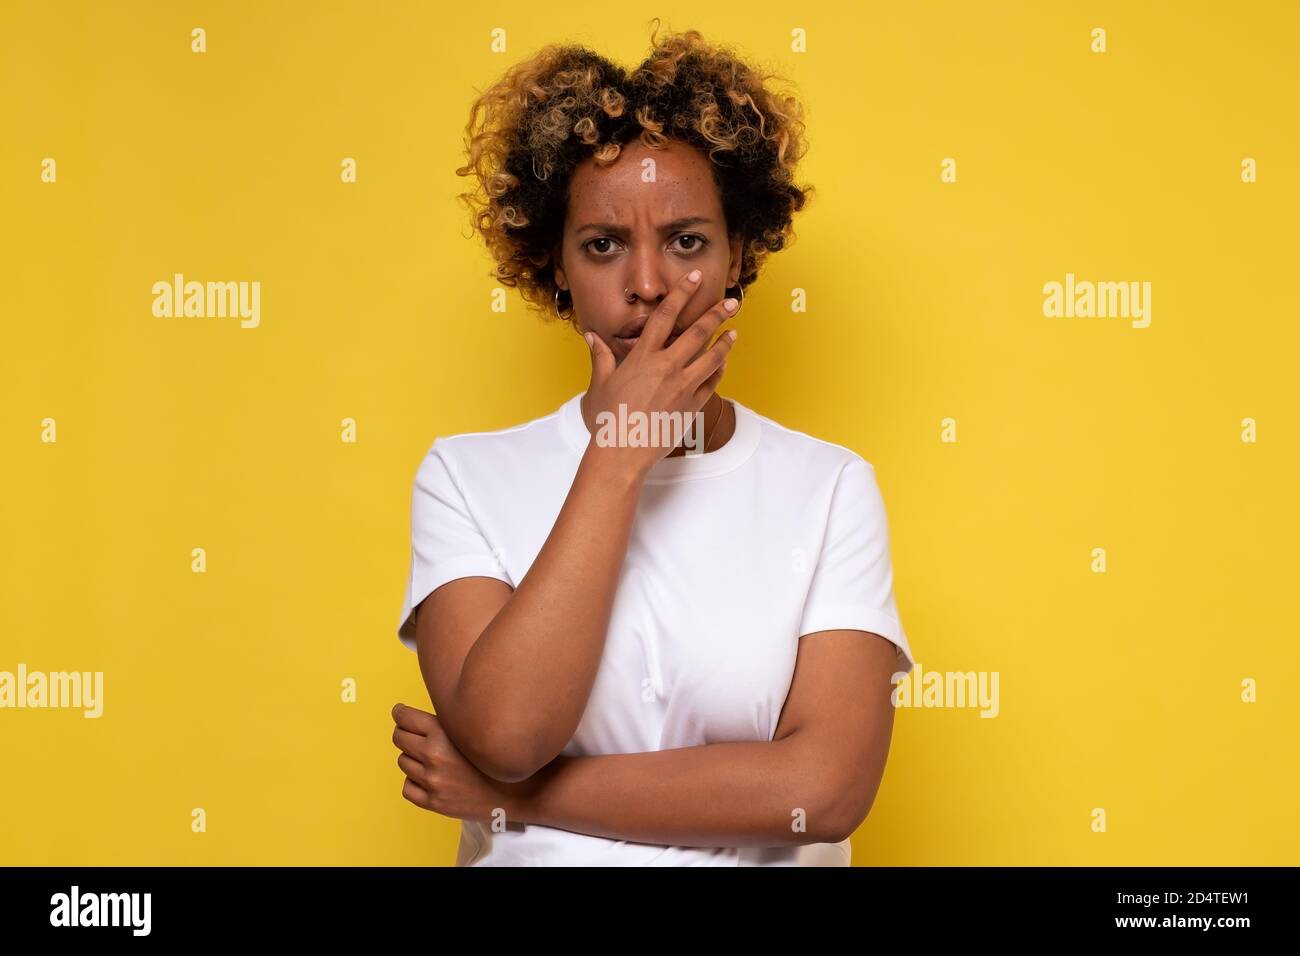 Lovely confused african woman with curly hair against yellow wall. Stock Photo